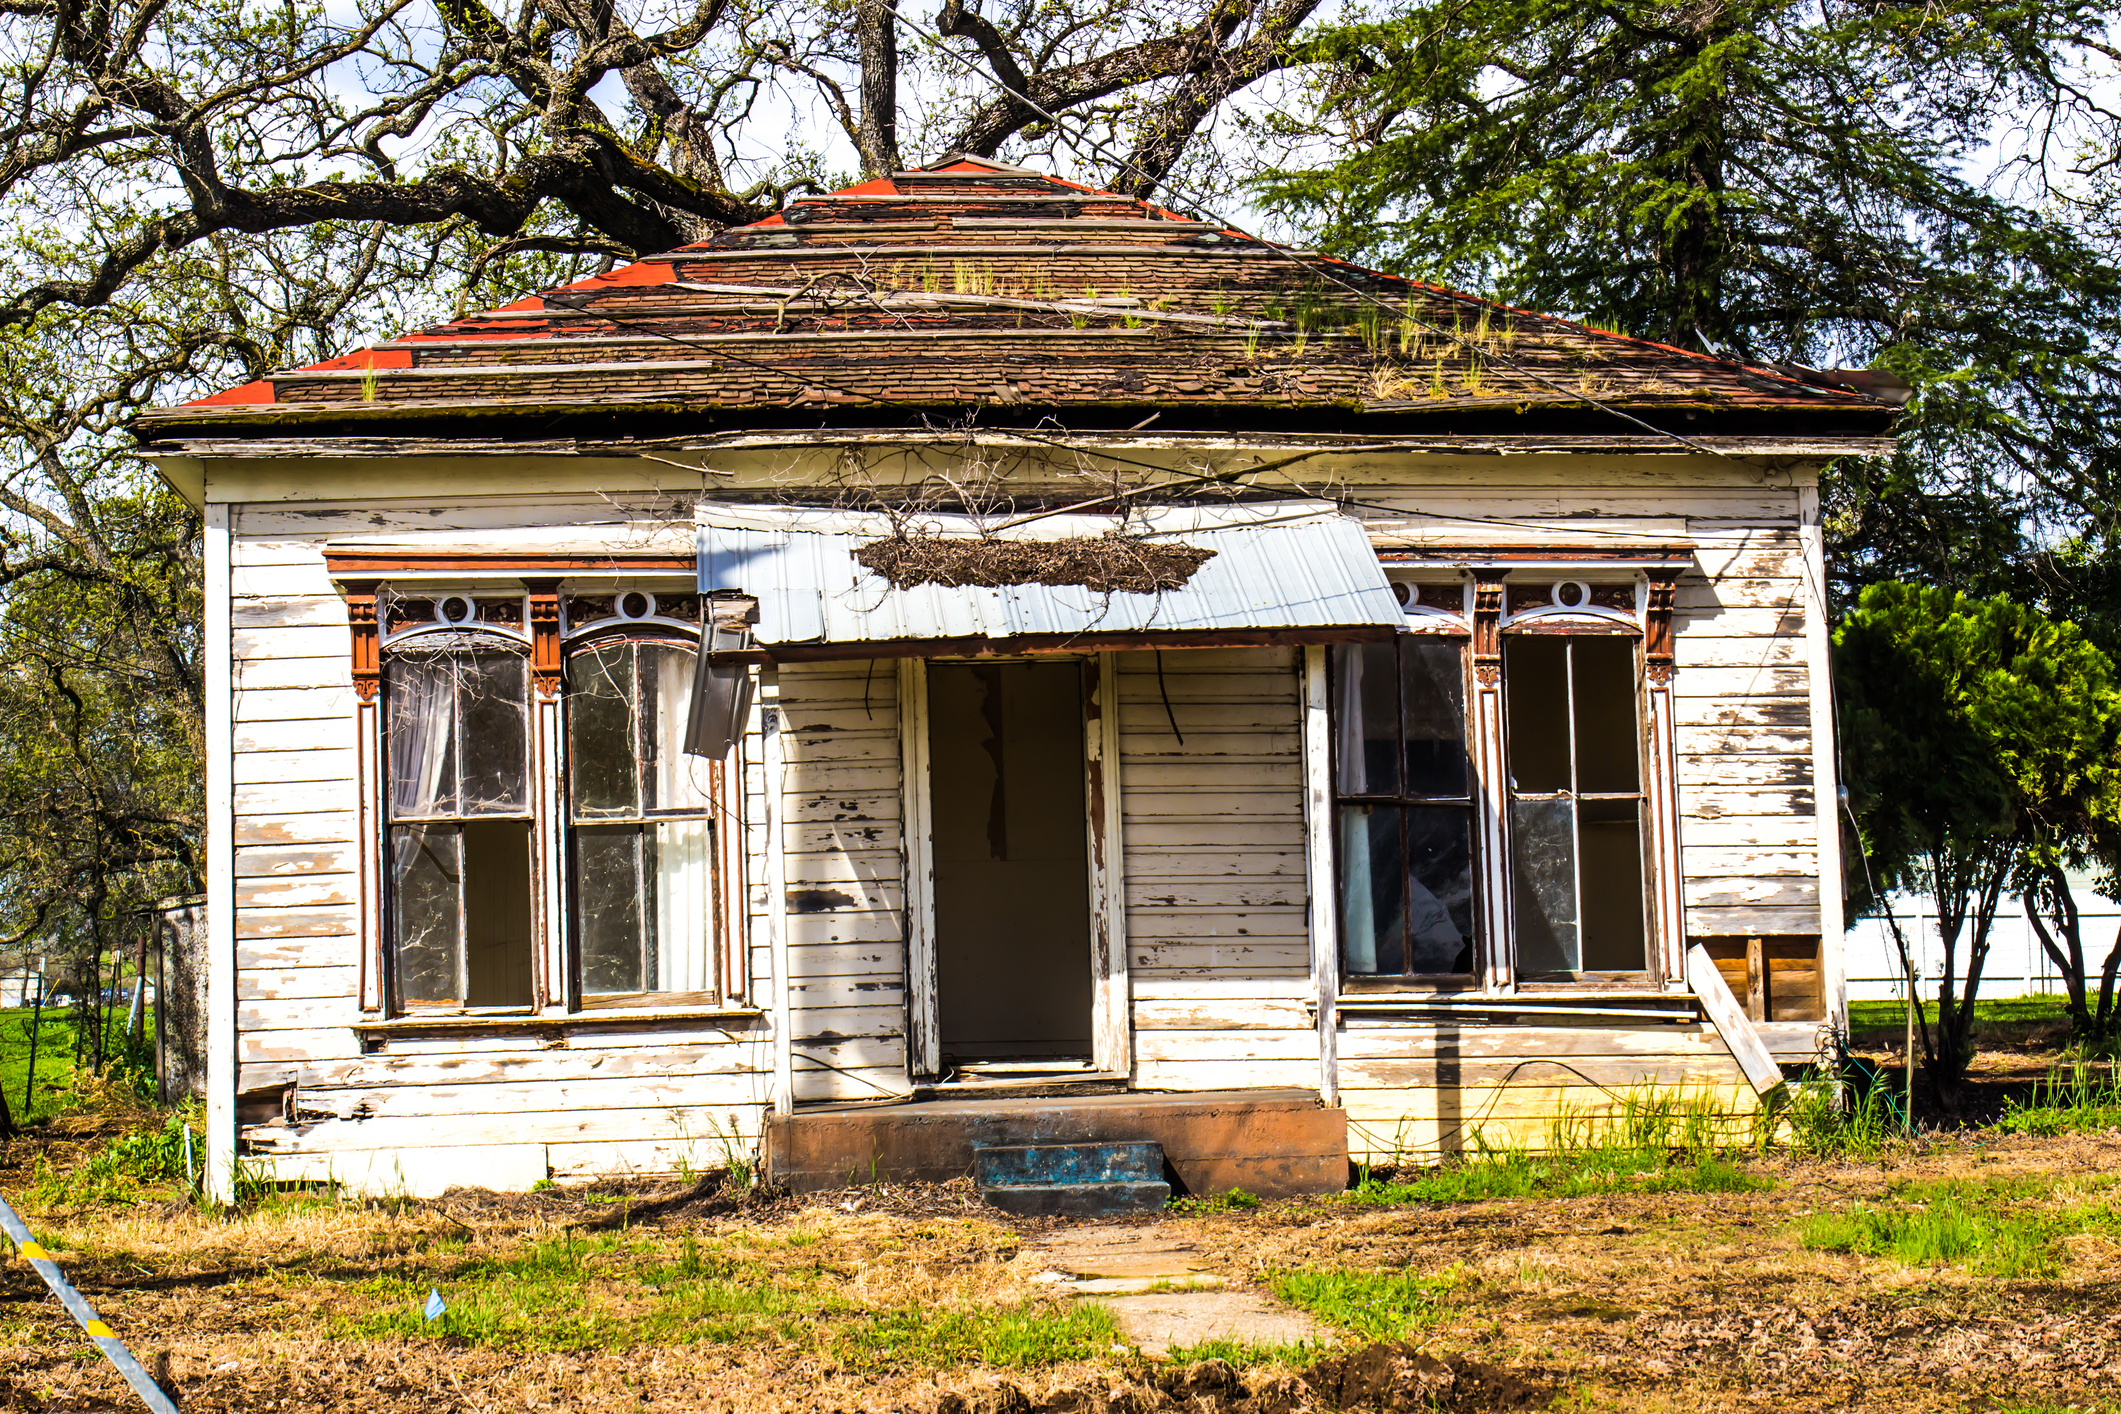 Cities With the Most Vacant Homes, and Why It Matters | Millionacres